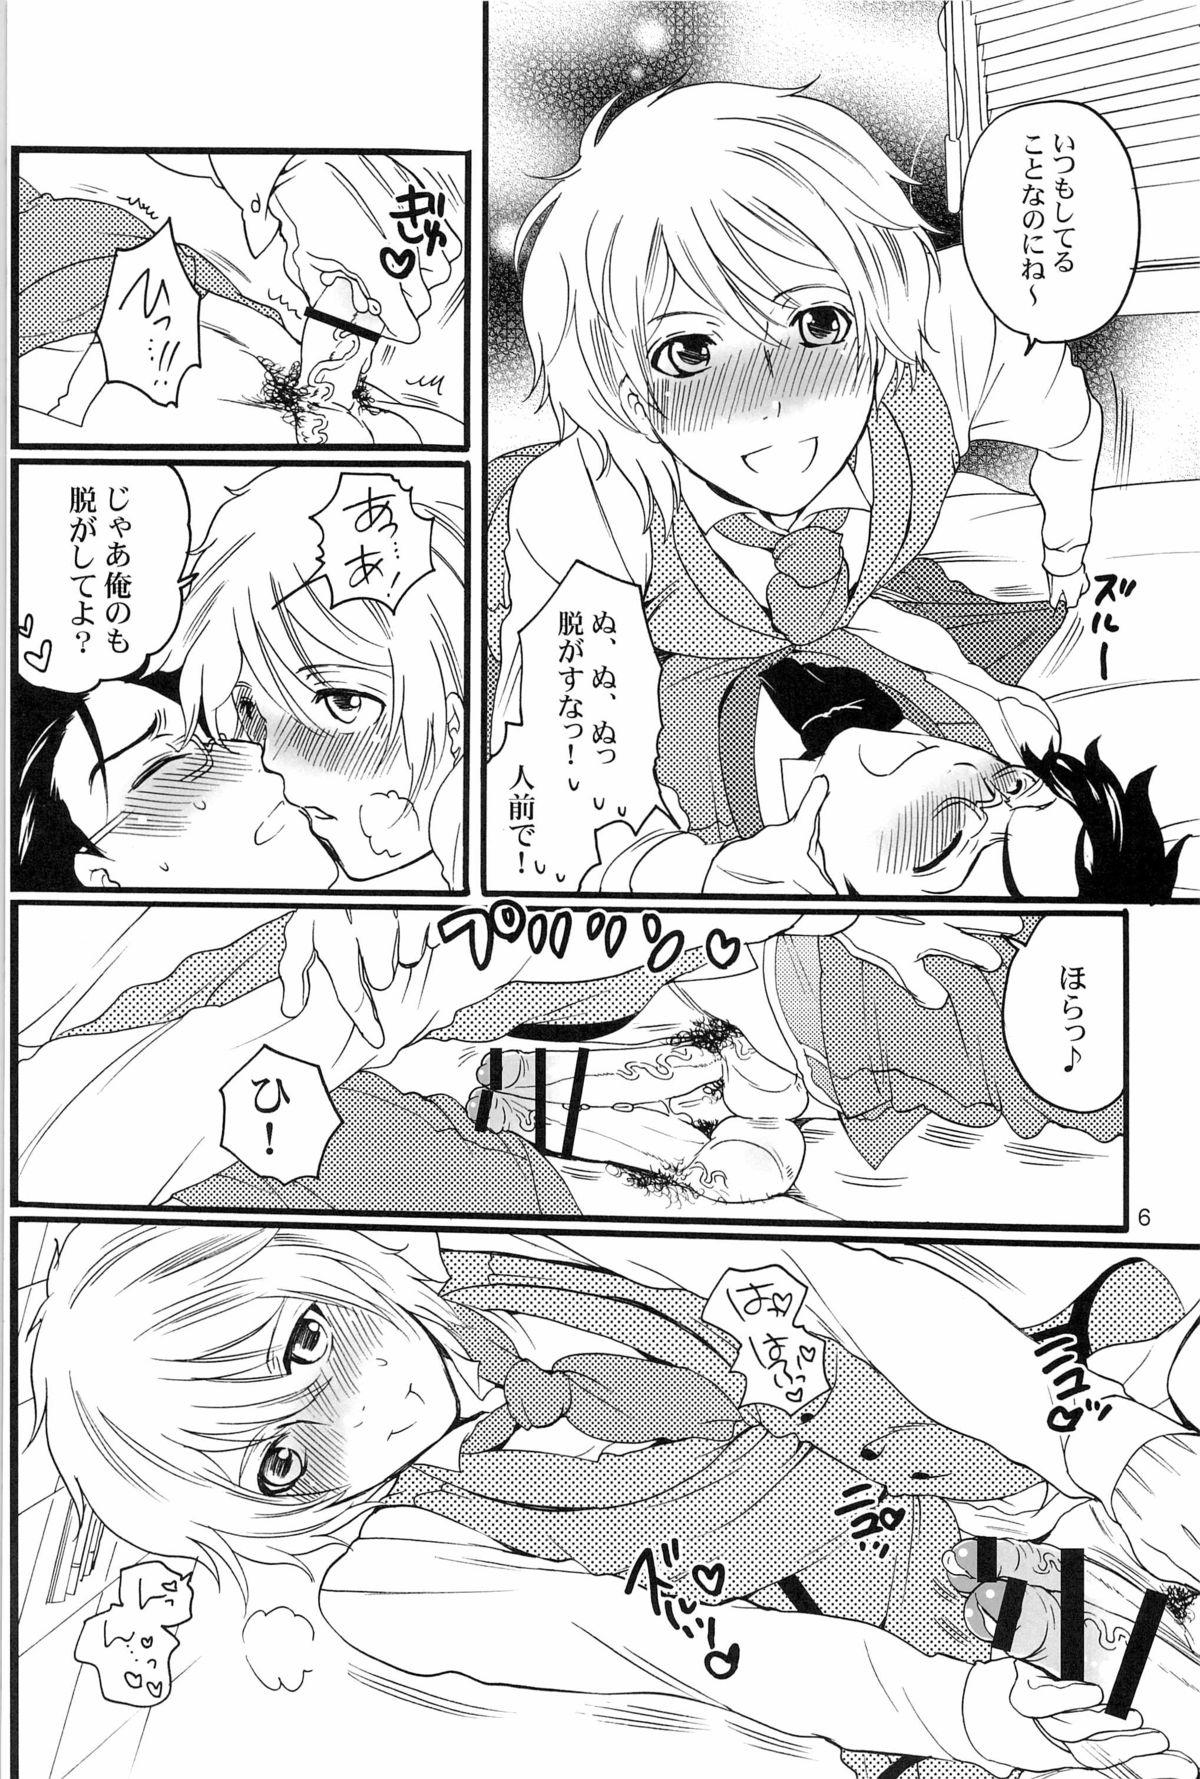 Whores DT Kouryakuhon - Starry sky Cocksucking - Page 6